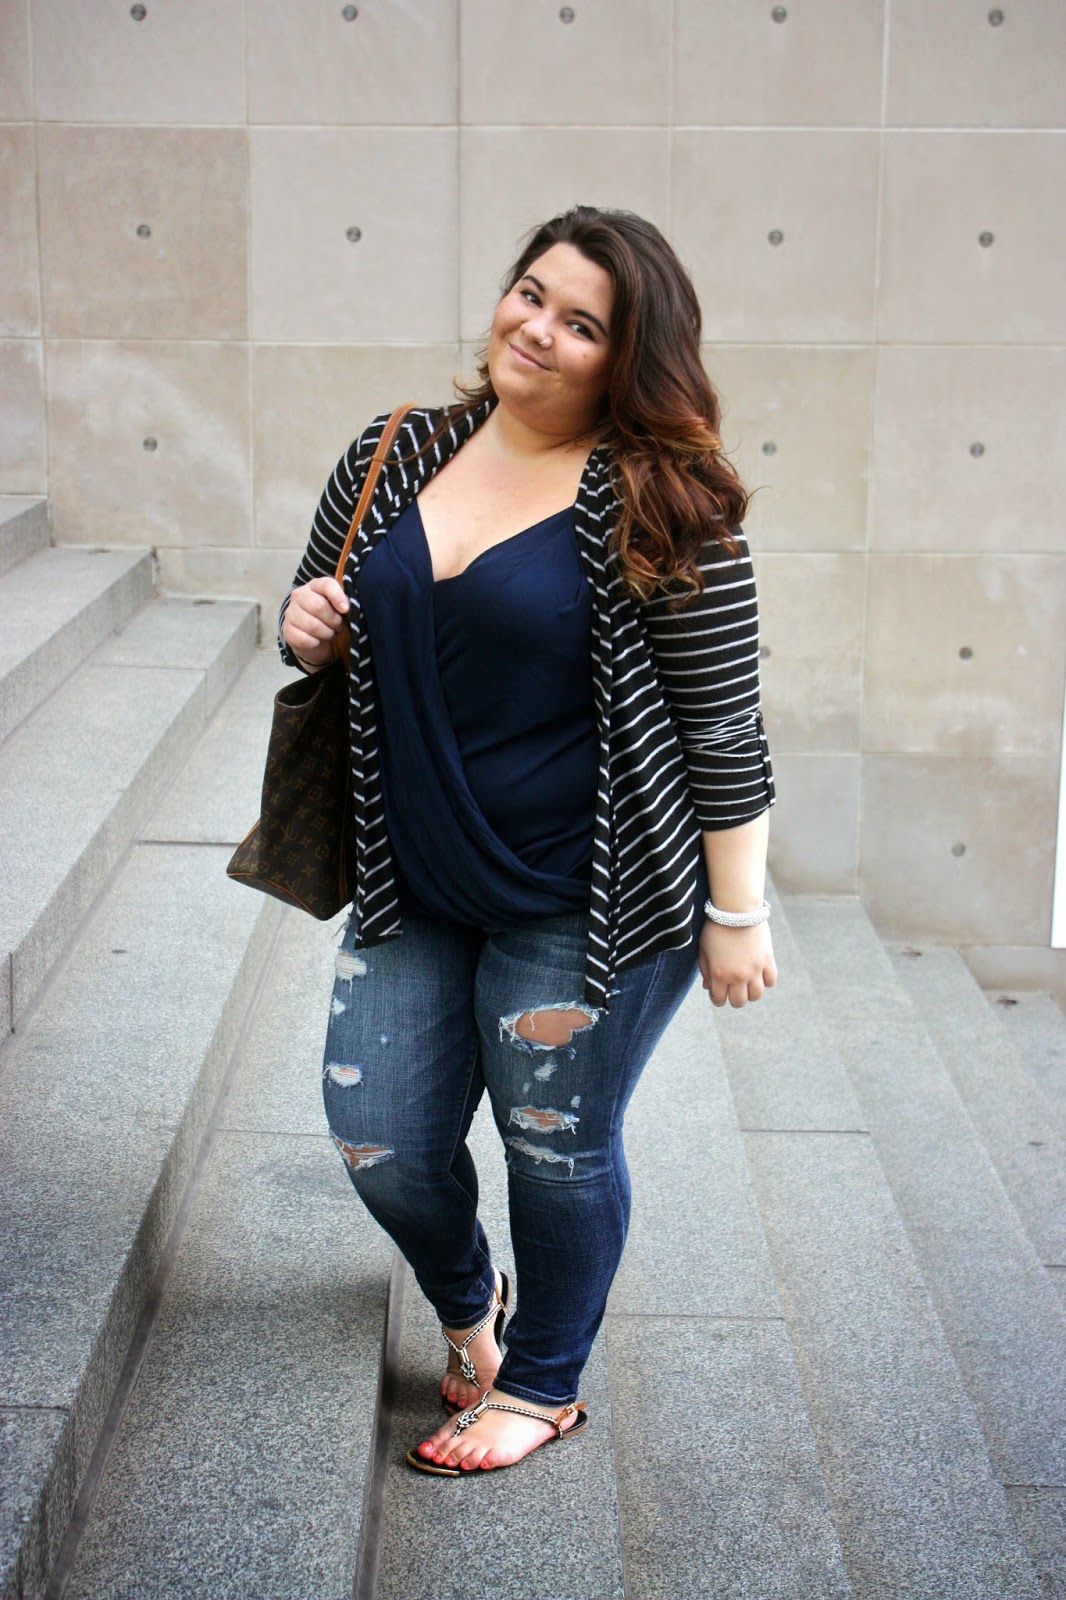 curvy fashionista, Destroyed denim, american eagle jeans, louis vuitton tote, stripes, cardigans, swarovski bangle, missimo sandals, forever 21 plus size, curly hair, ombre, deep neck, plus size fashion blogger, natalie craig, natalie in the city, chicago, spring style 2014, fashion blogger, plus size